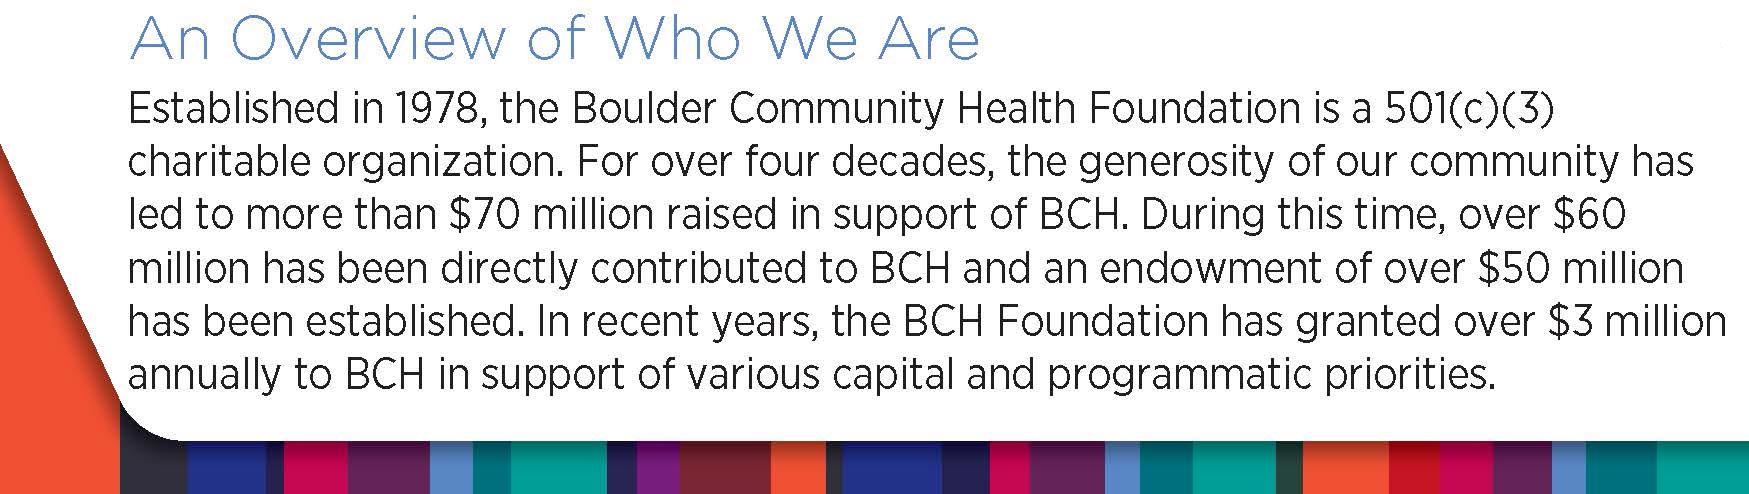 Established in 1978, the Boulder Community Health Foundation is a 501(C)(3) nonprofit, charitable organization dedicated to enhancing quality and availability of health care services in Boulder County. The Foundation generates and administers all charitable gifts to our nonprofit community-owned hospital system to innovate and stay at the forefront of medical advancements and technology and provide full access to emergency care to all. The generosity of our community has led to more than $60 million raised in support of BCH. During this time, over $50 million has been directly contributed to BCH and an endowment close to $40 million has been established. On average, the Foundation has granted $2.6 million annually to BCH in recent years in support of various capital and programmatic priorities.